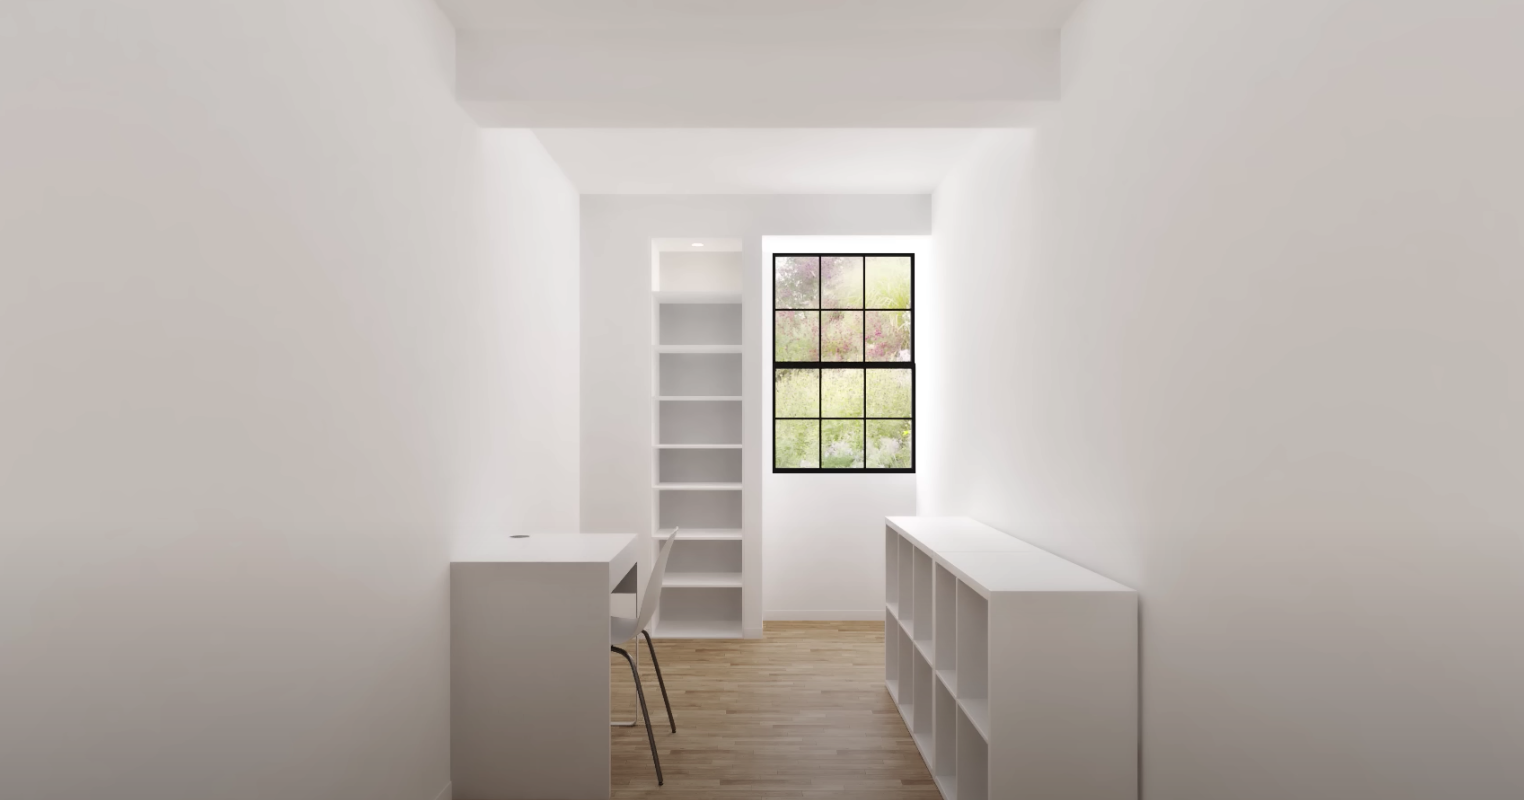 1 Empty Tiny Home Office Space: 3 Designs by 3 Interior Designers (Interesting Differences)